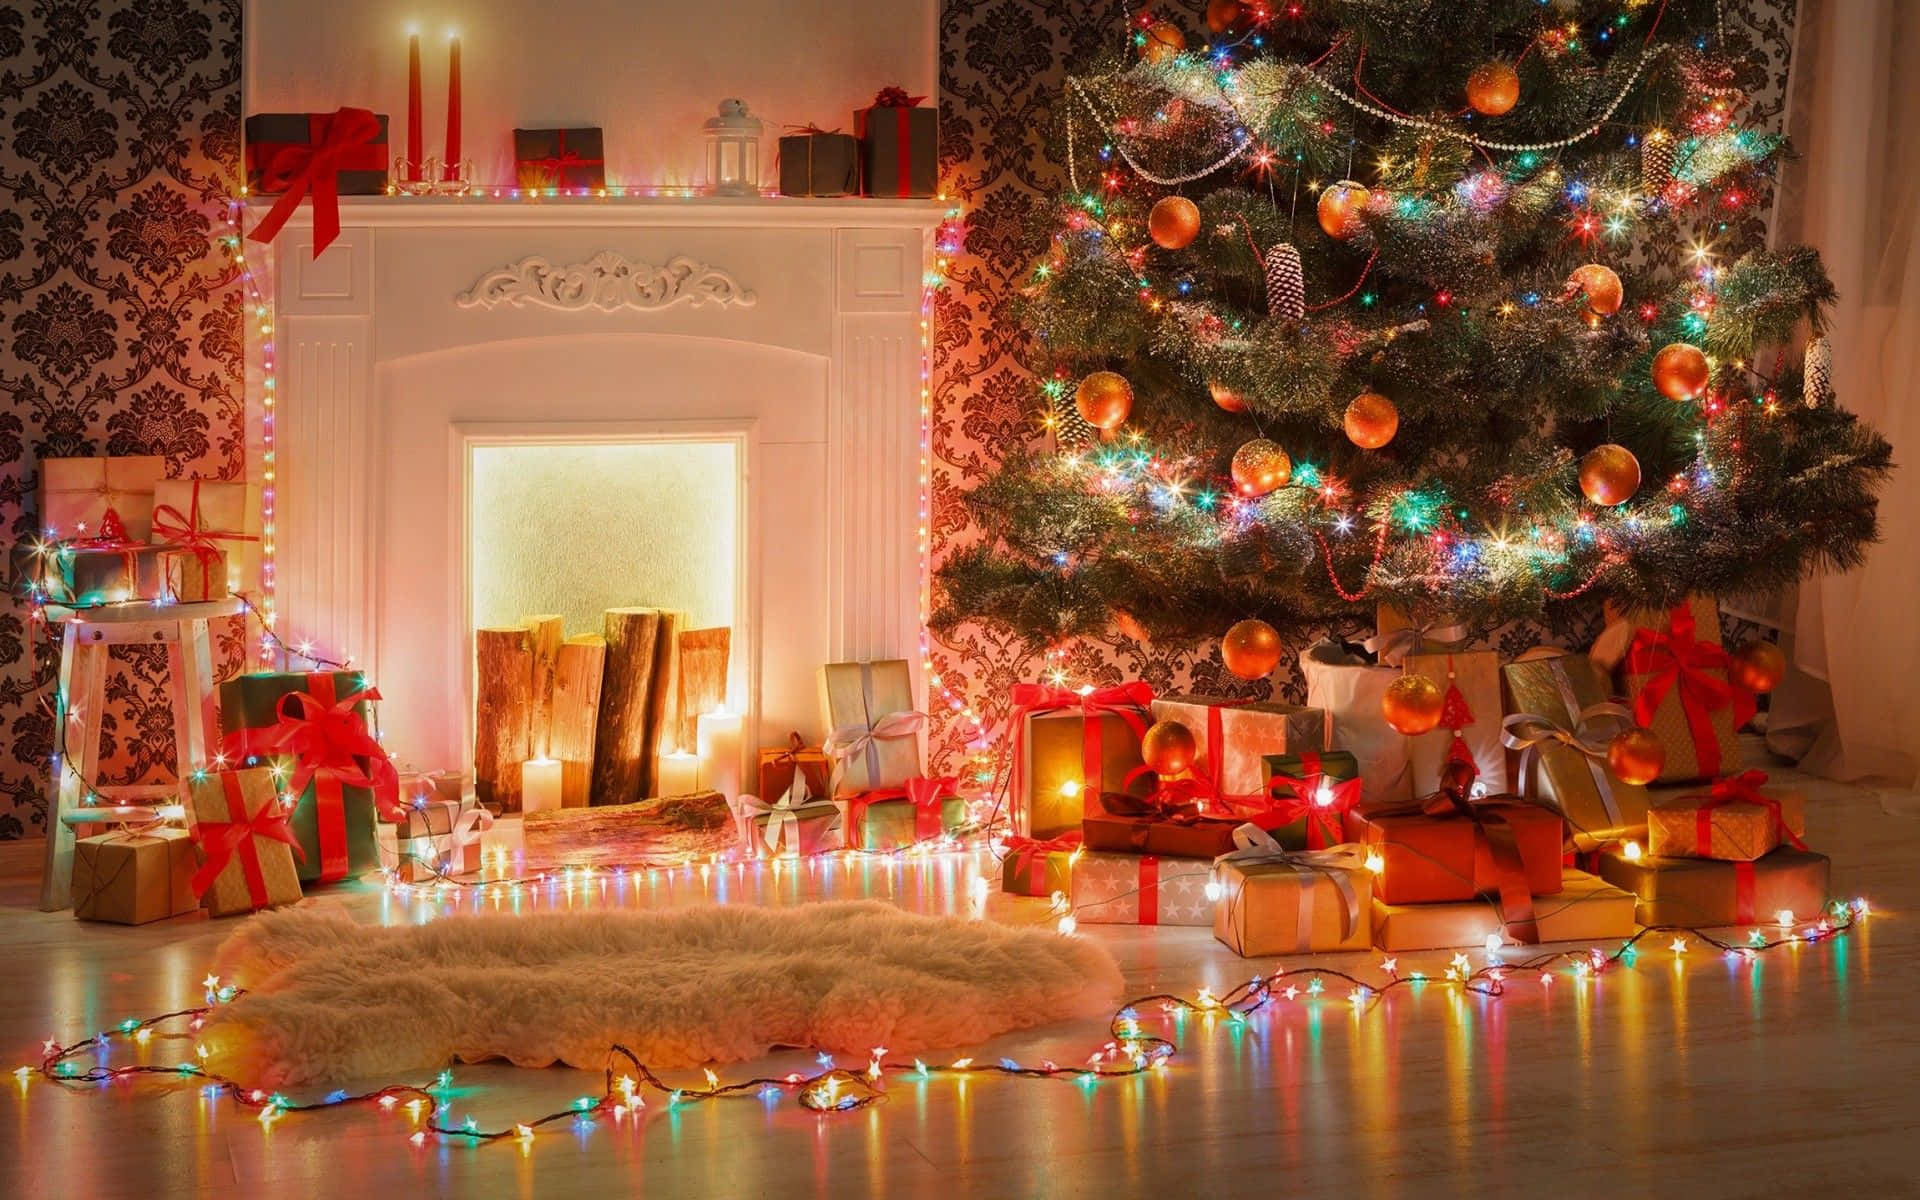 Christmas Fireplace With Presents And Colorful Lights Background